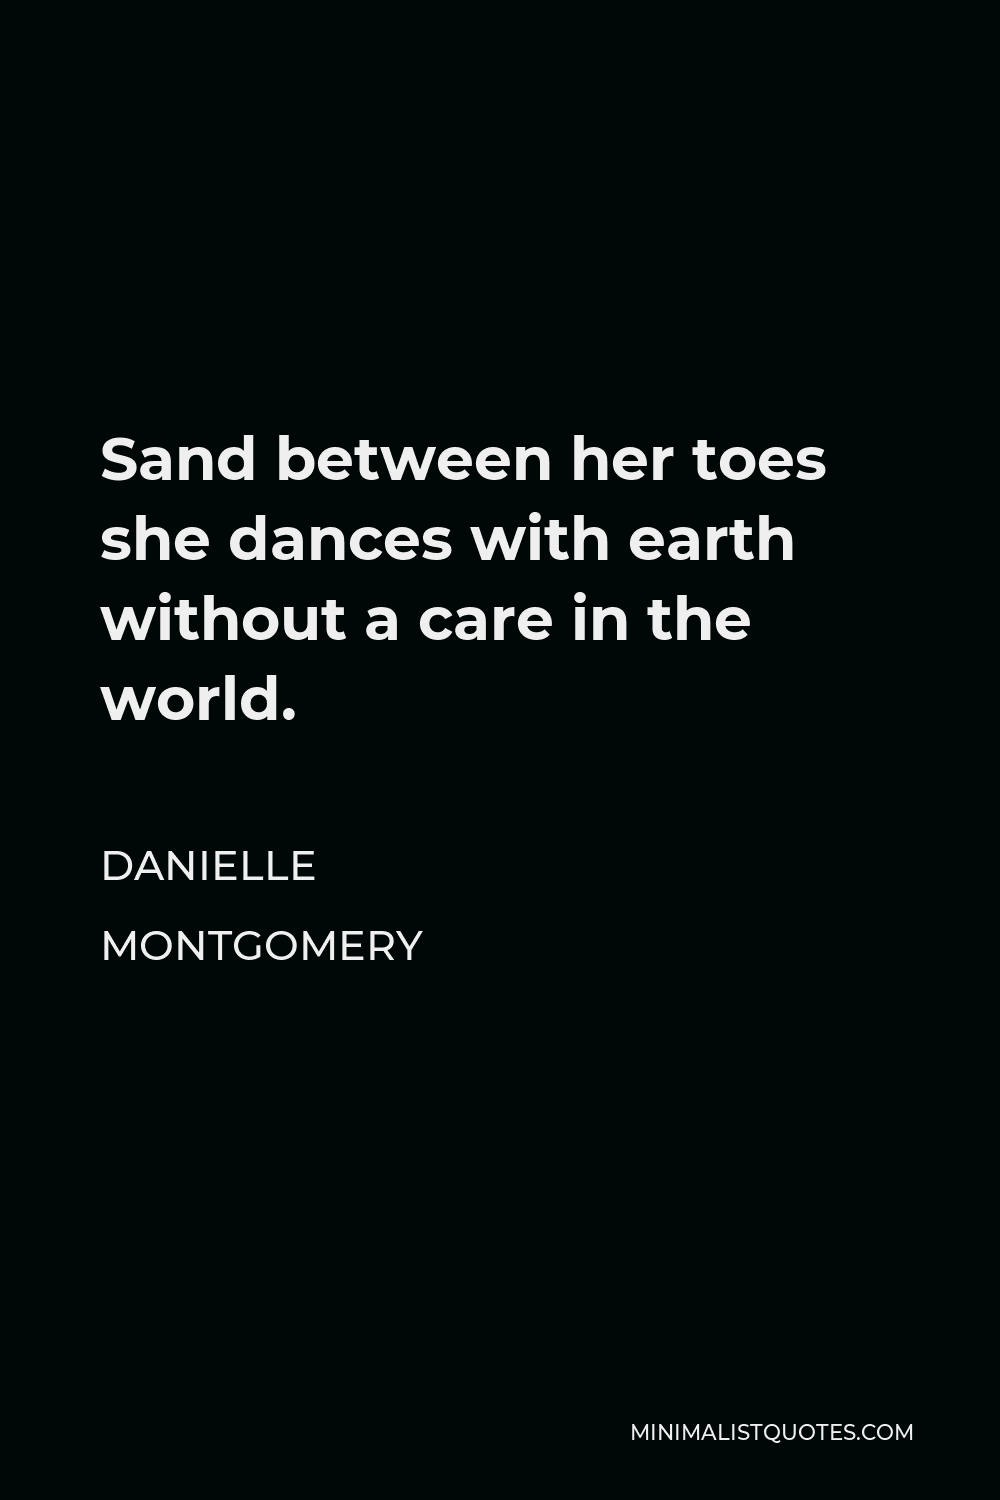 Danielle Montgomery Quote - Sand between her toes she dances with earth without a care in the world.